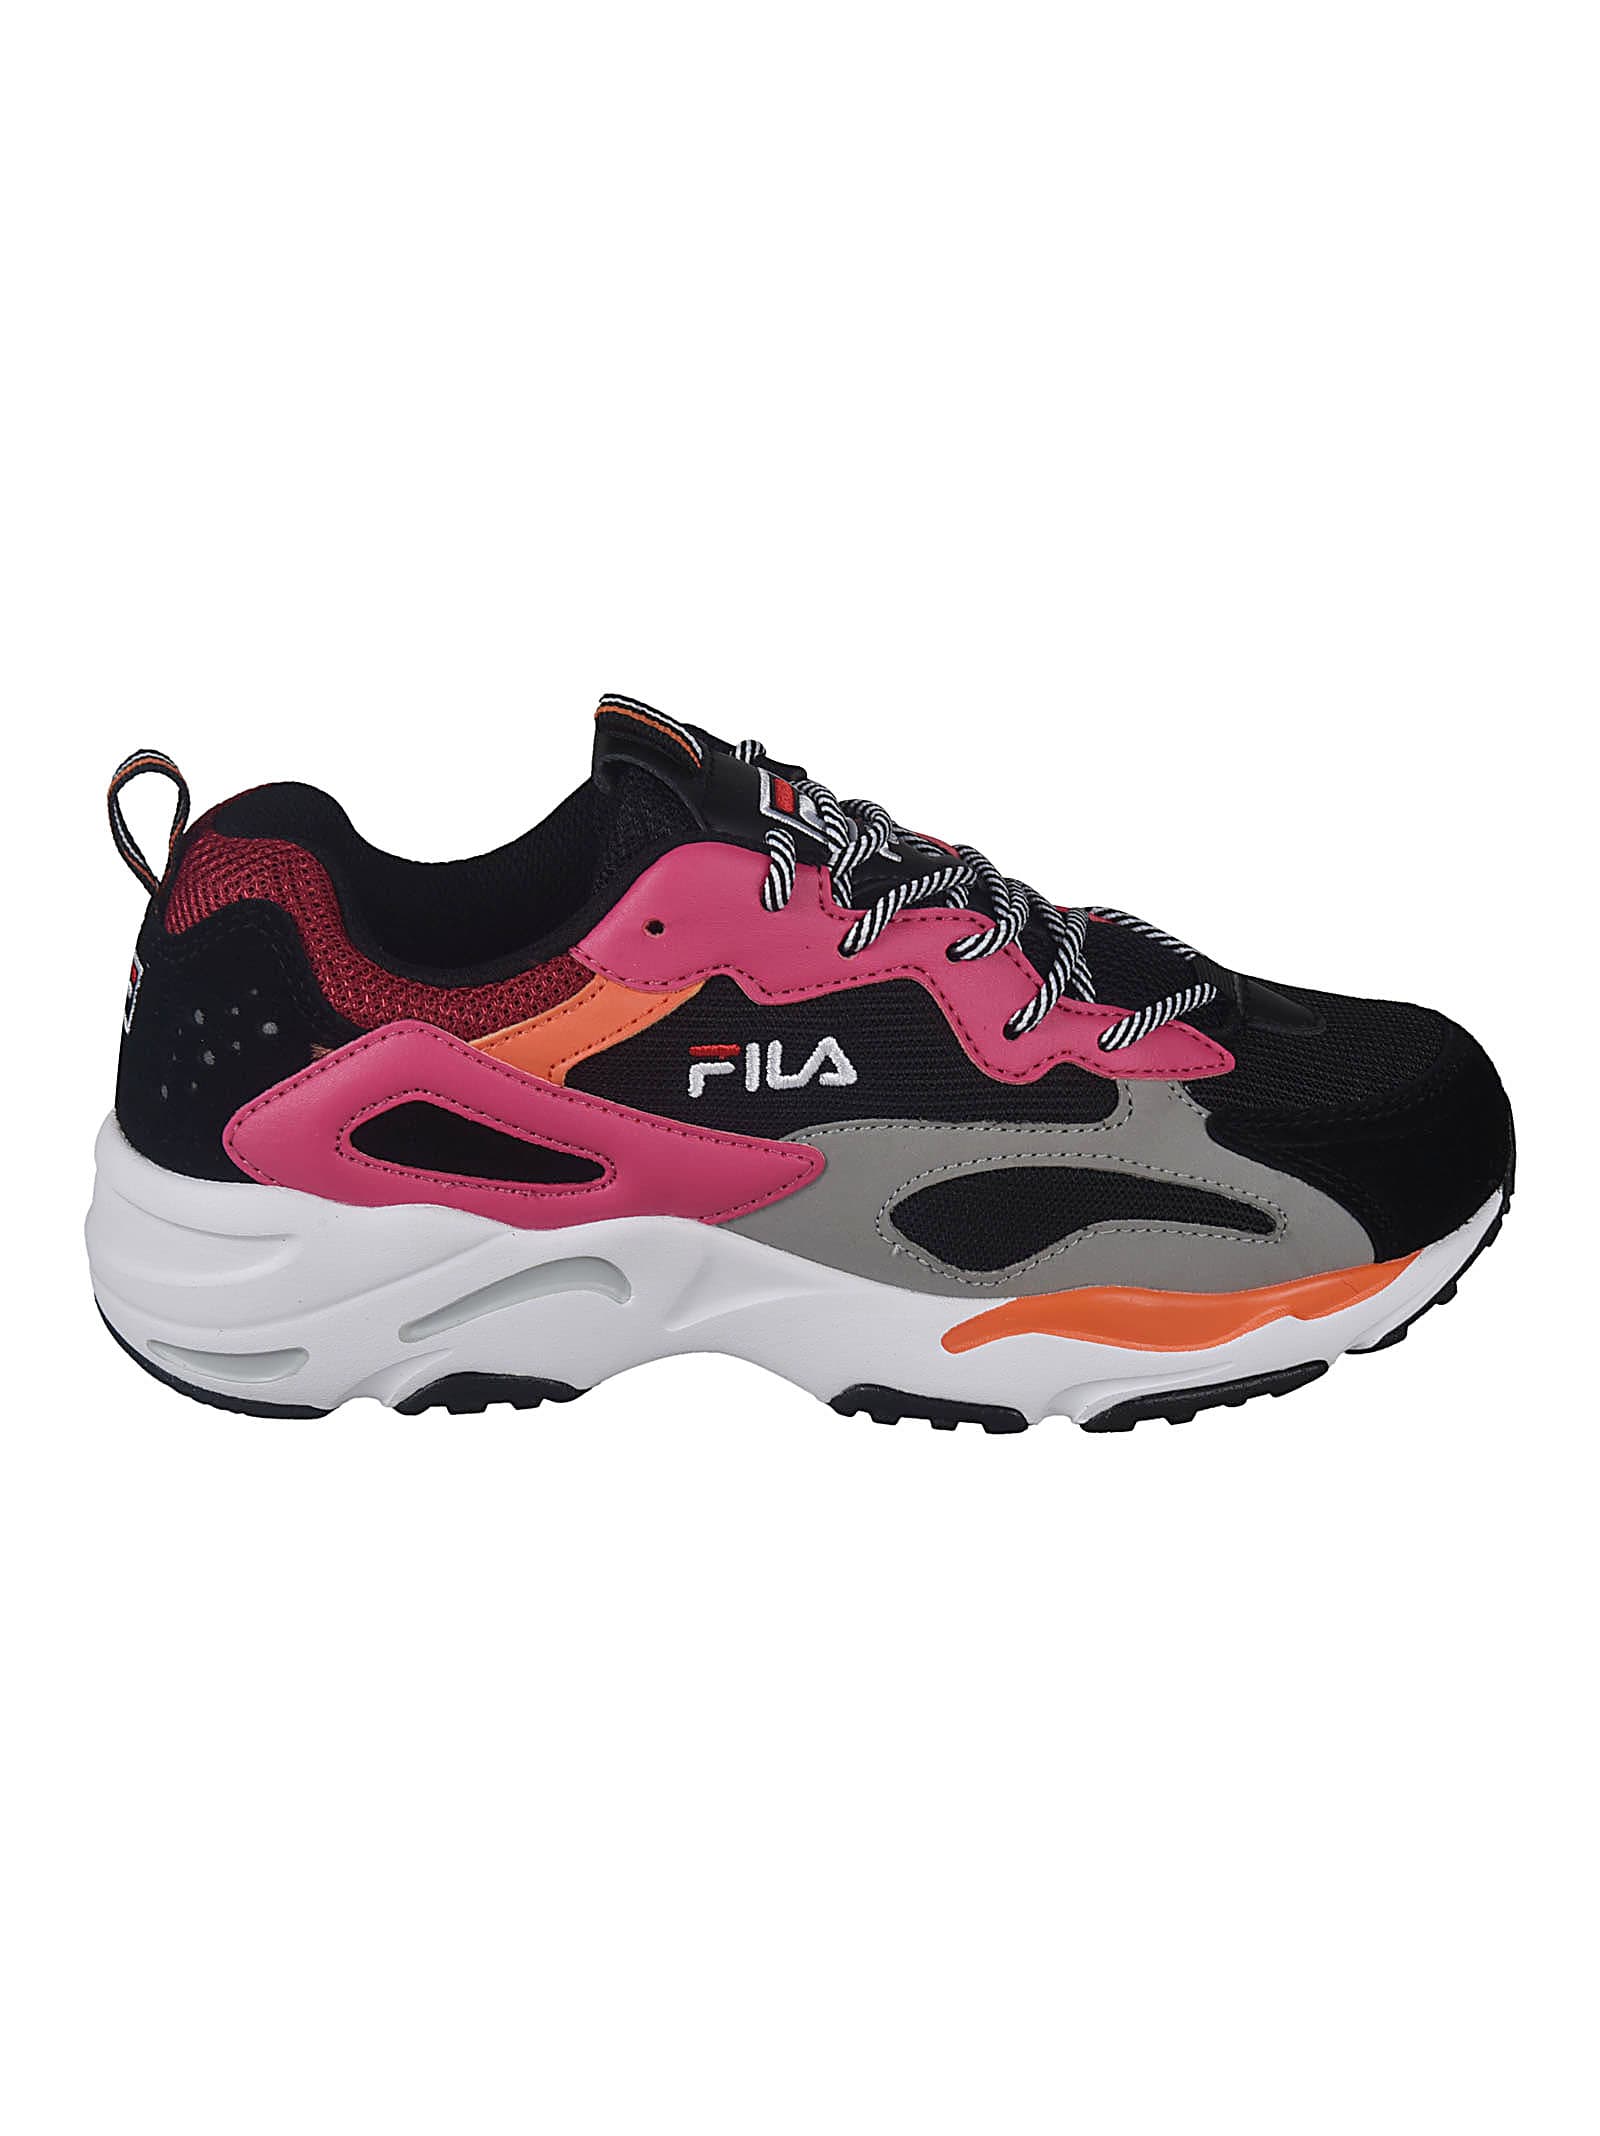 fila sneakers black and pink